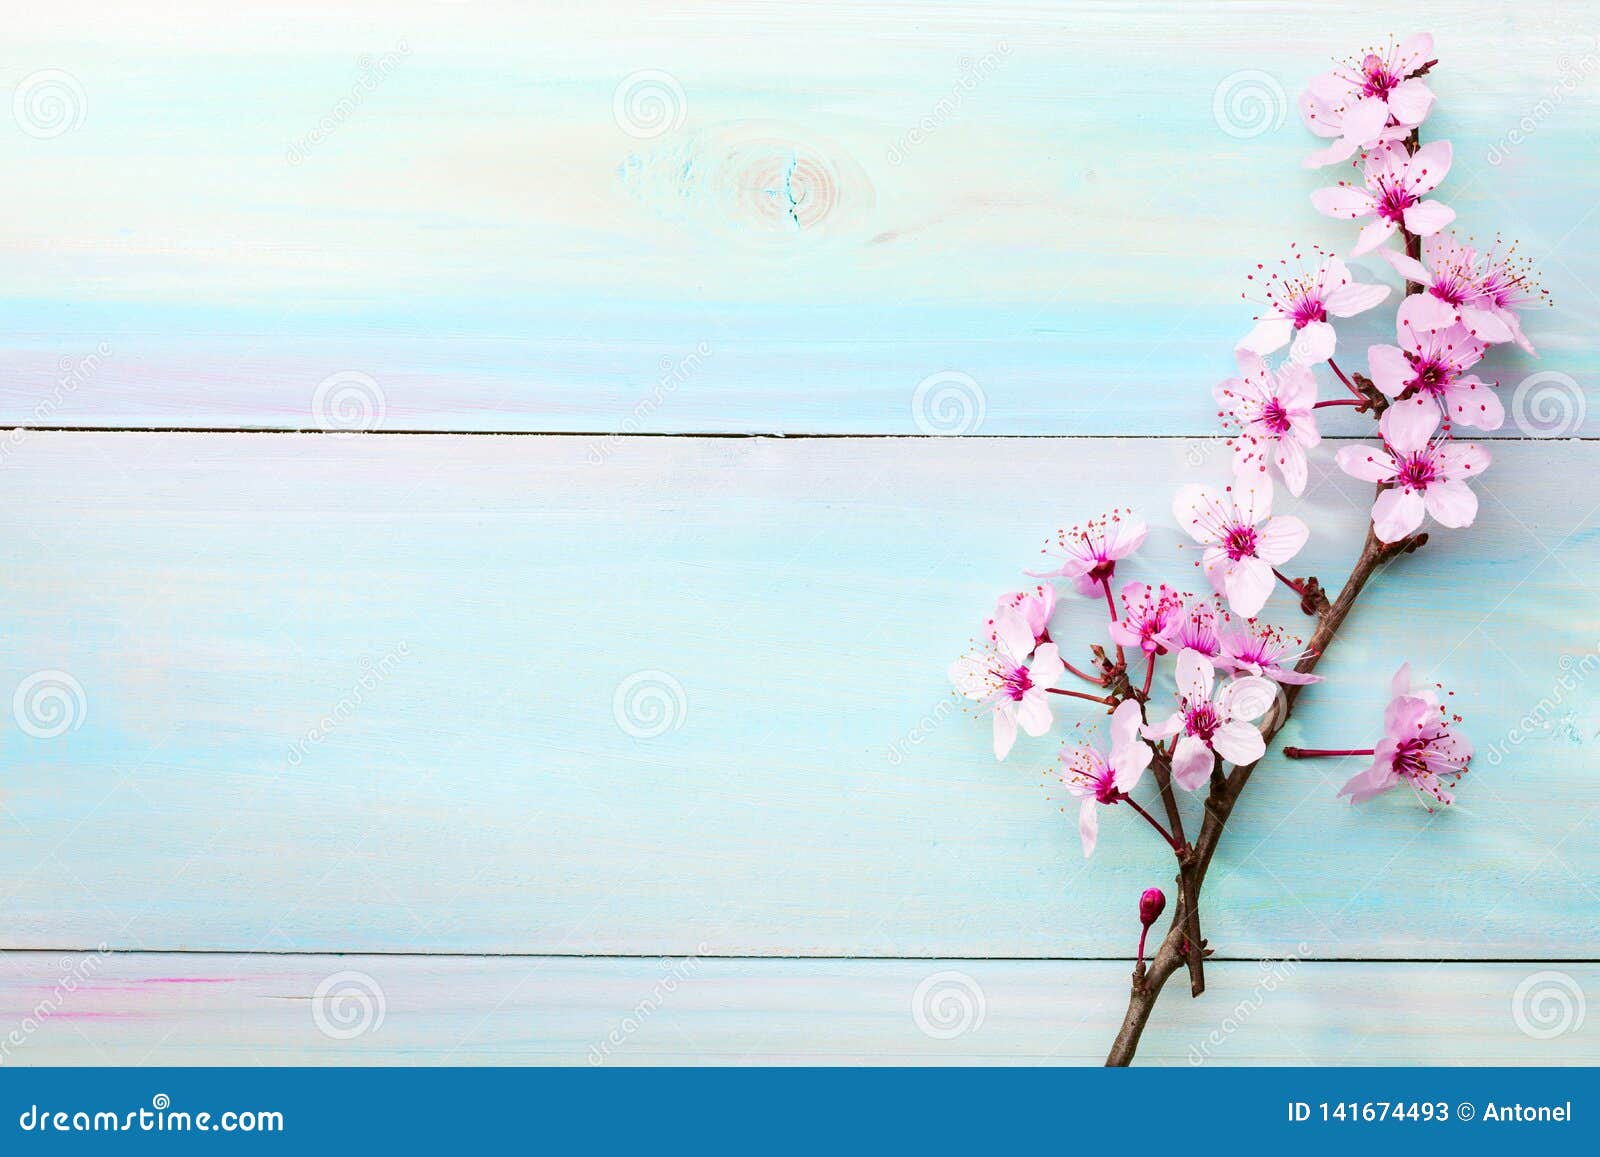 branches of sakura on wooden table. toned image